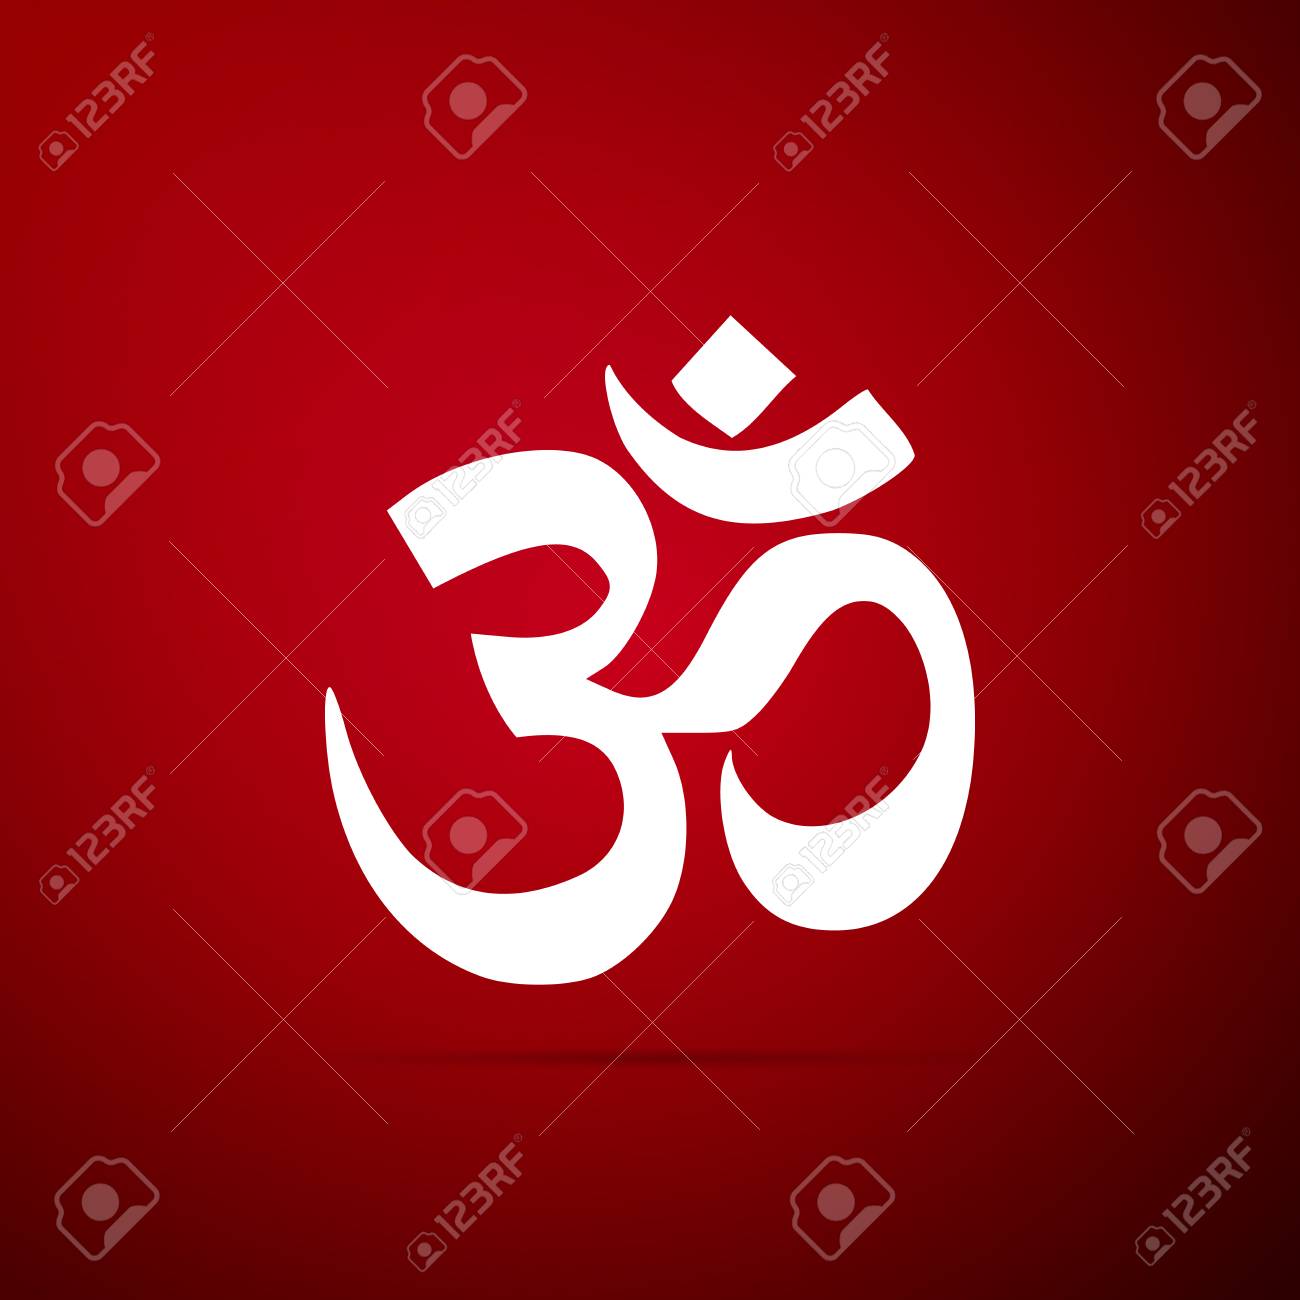 Om Or Aum Indian Sacred Sound Icon Isolated On Red Background